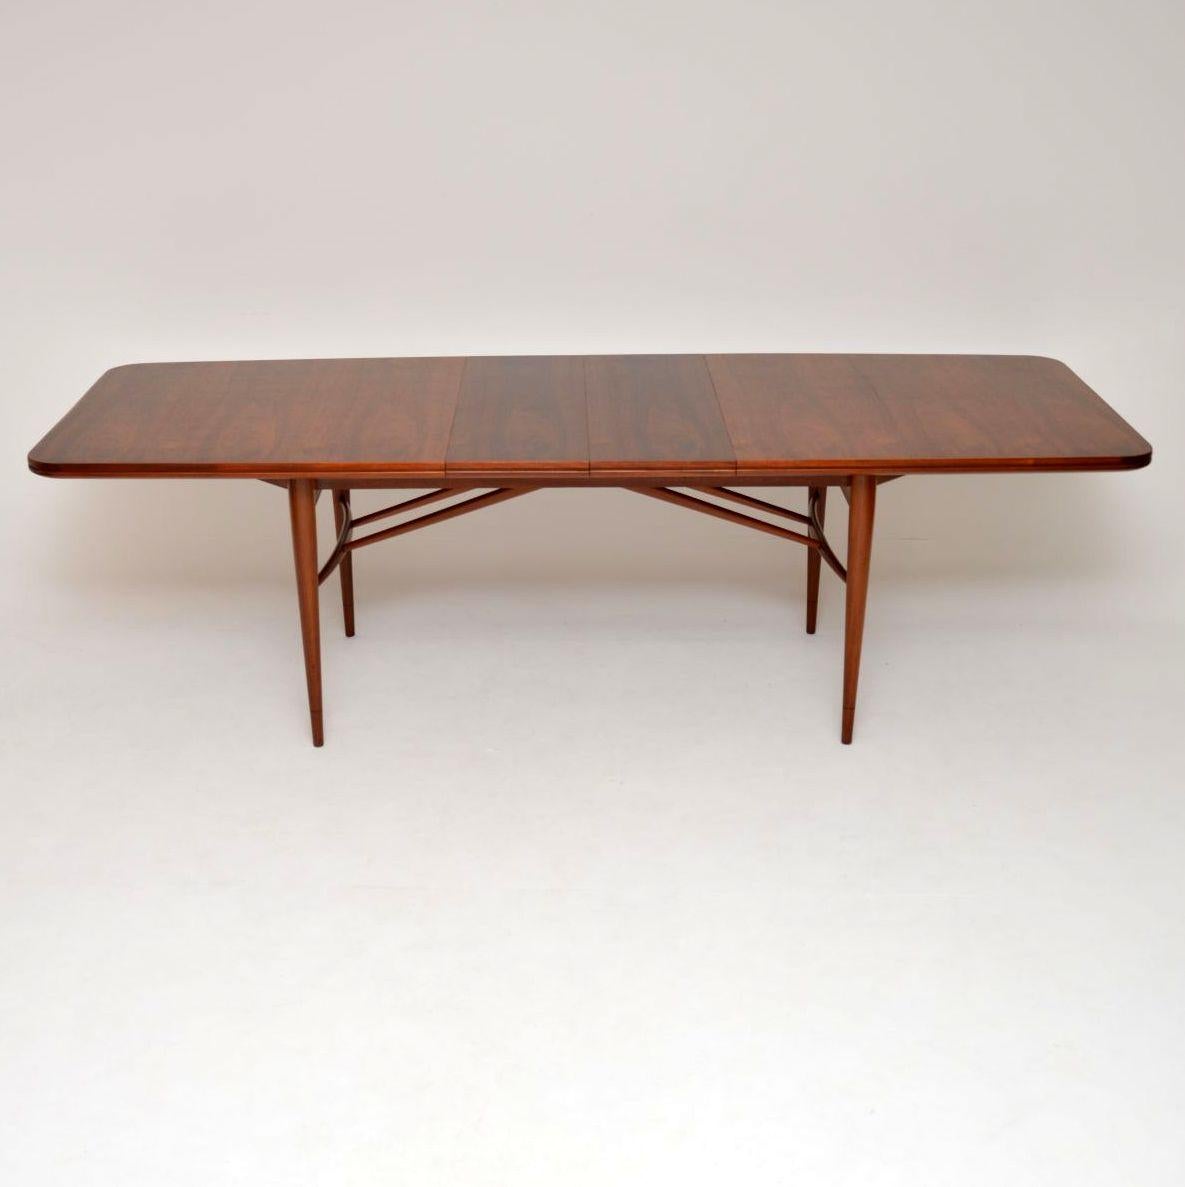 English 1960s Vintage Walnut Dining Table by Robert Heritage for Archie Shine